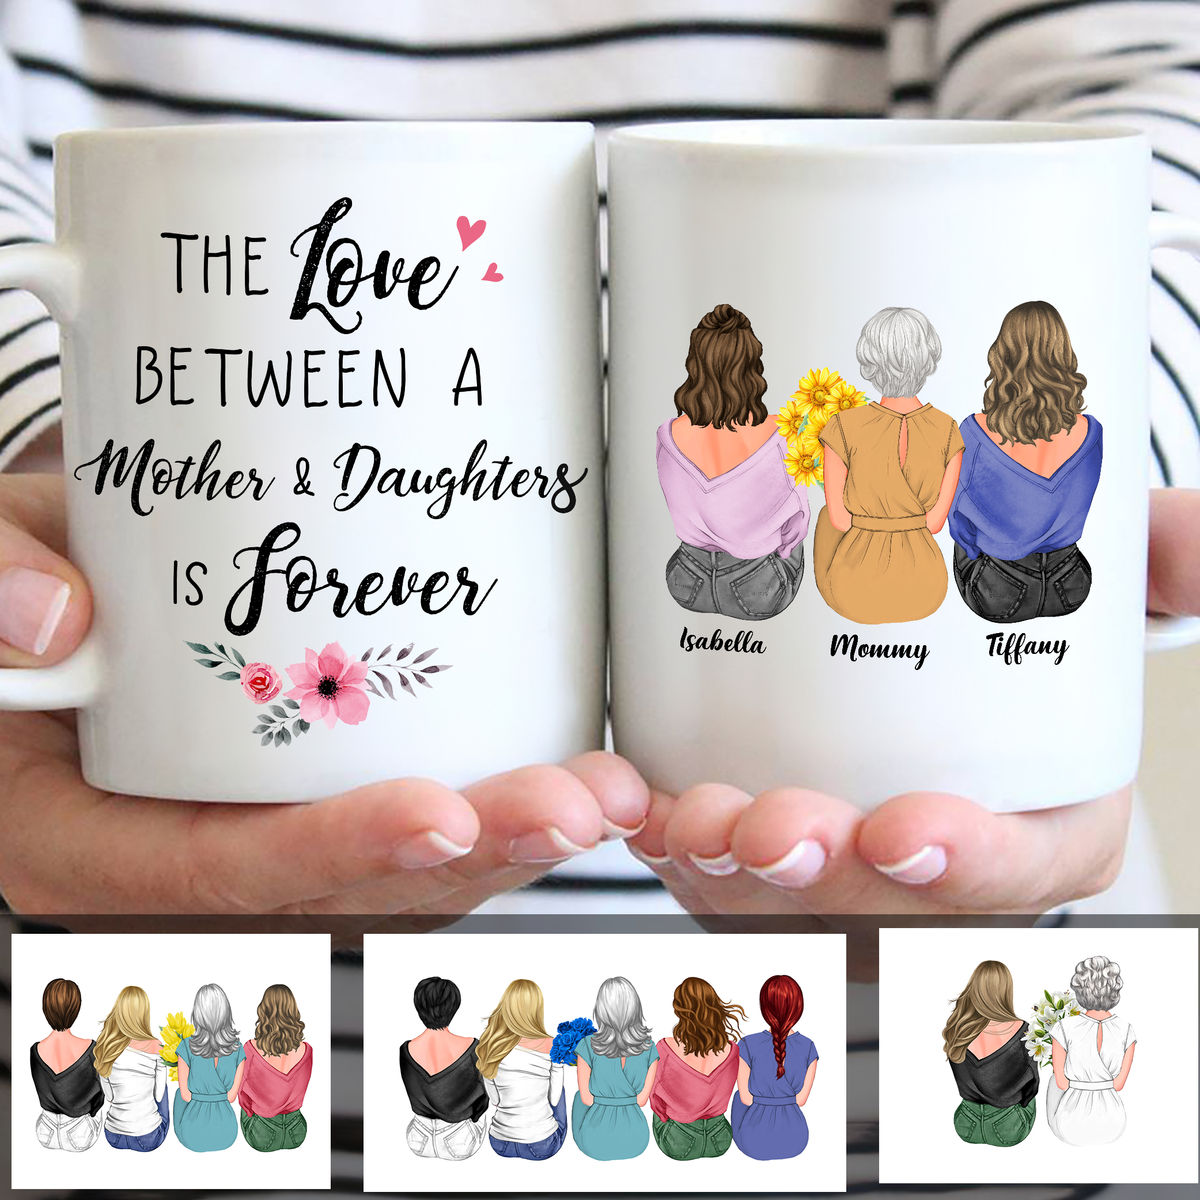 Mother's Day New Listing 2023 - Mother's Day Mug - Personalized